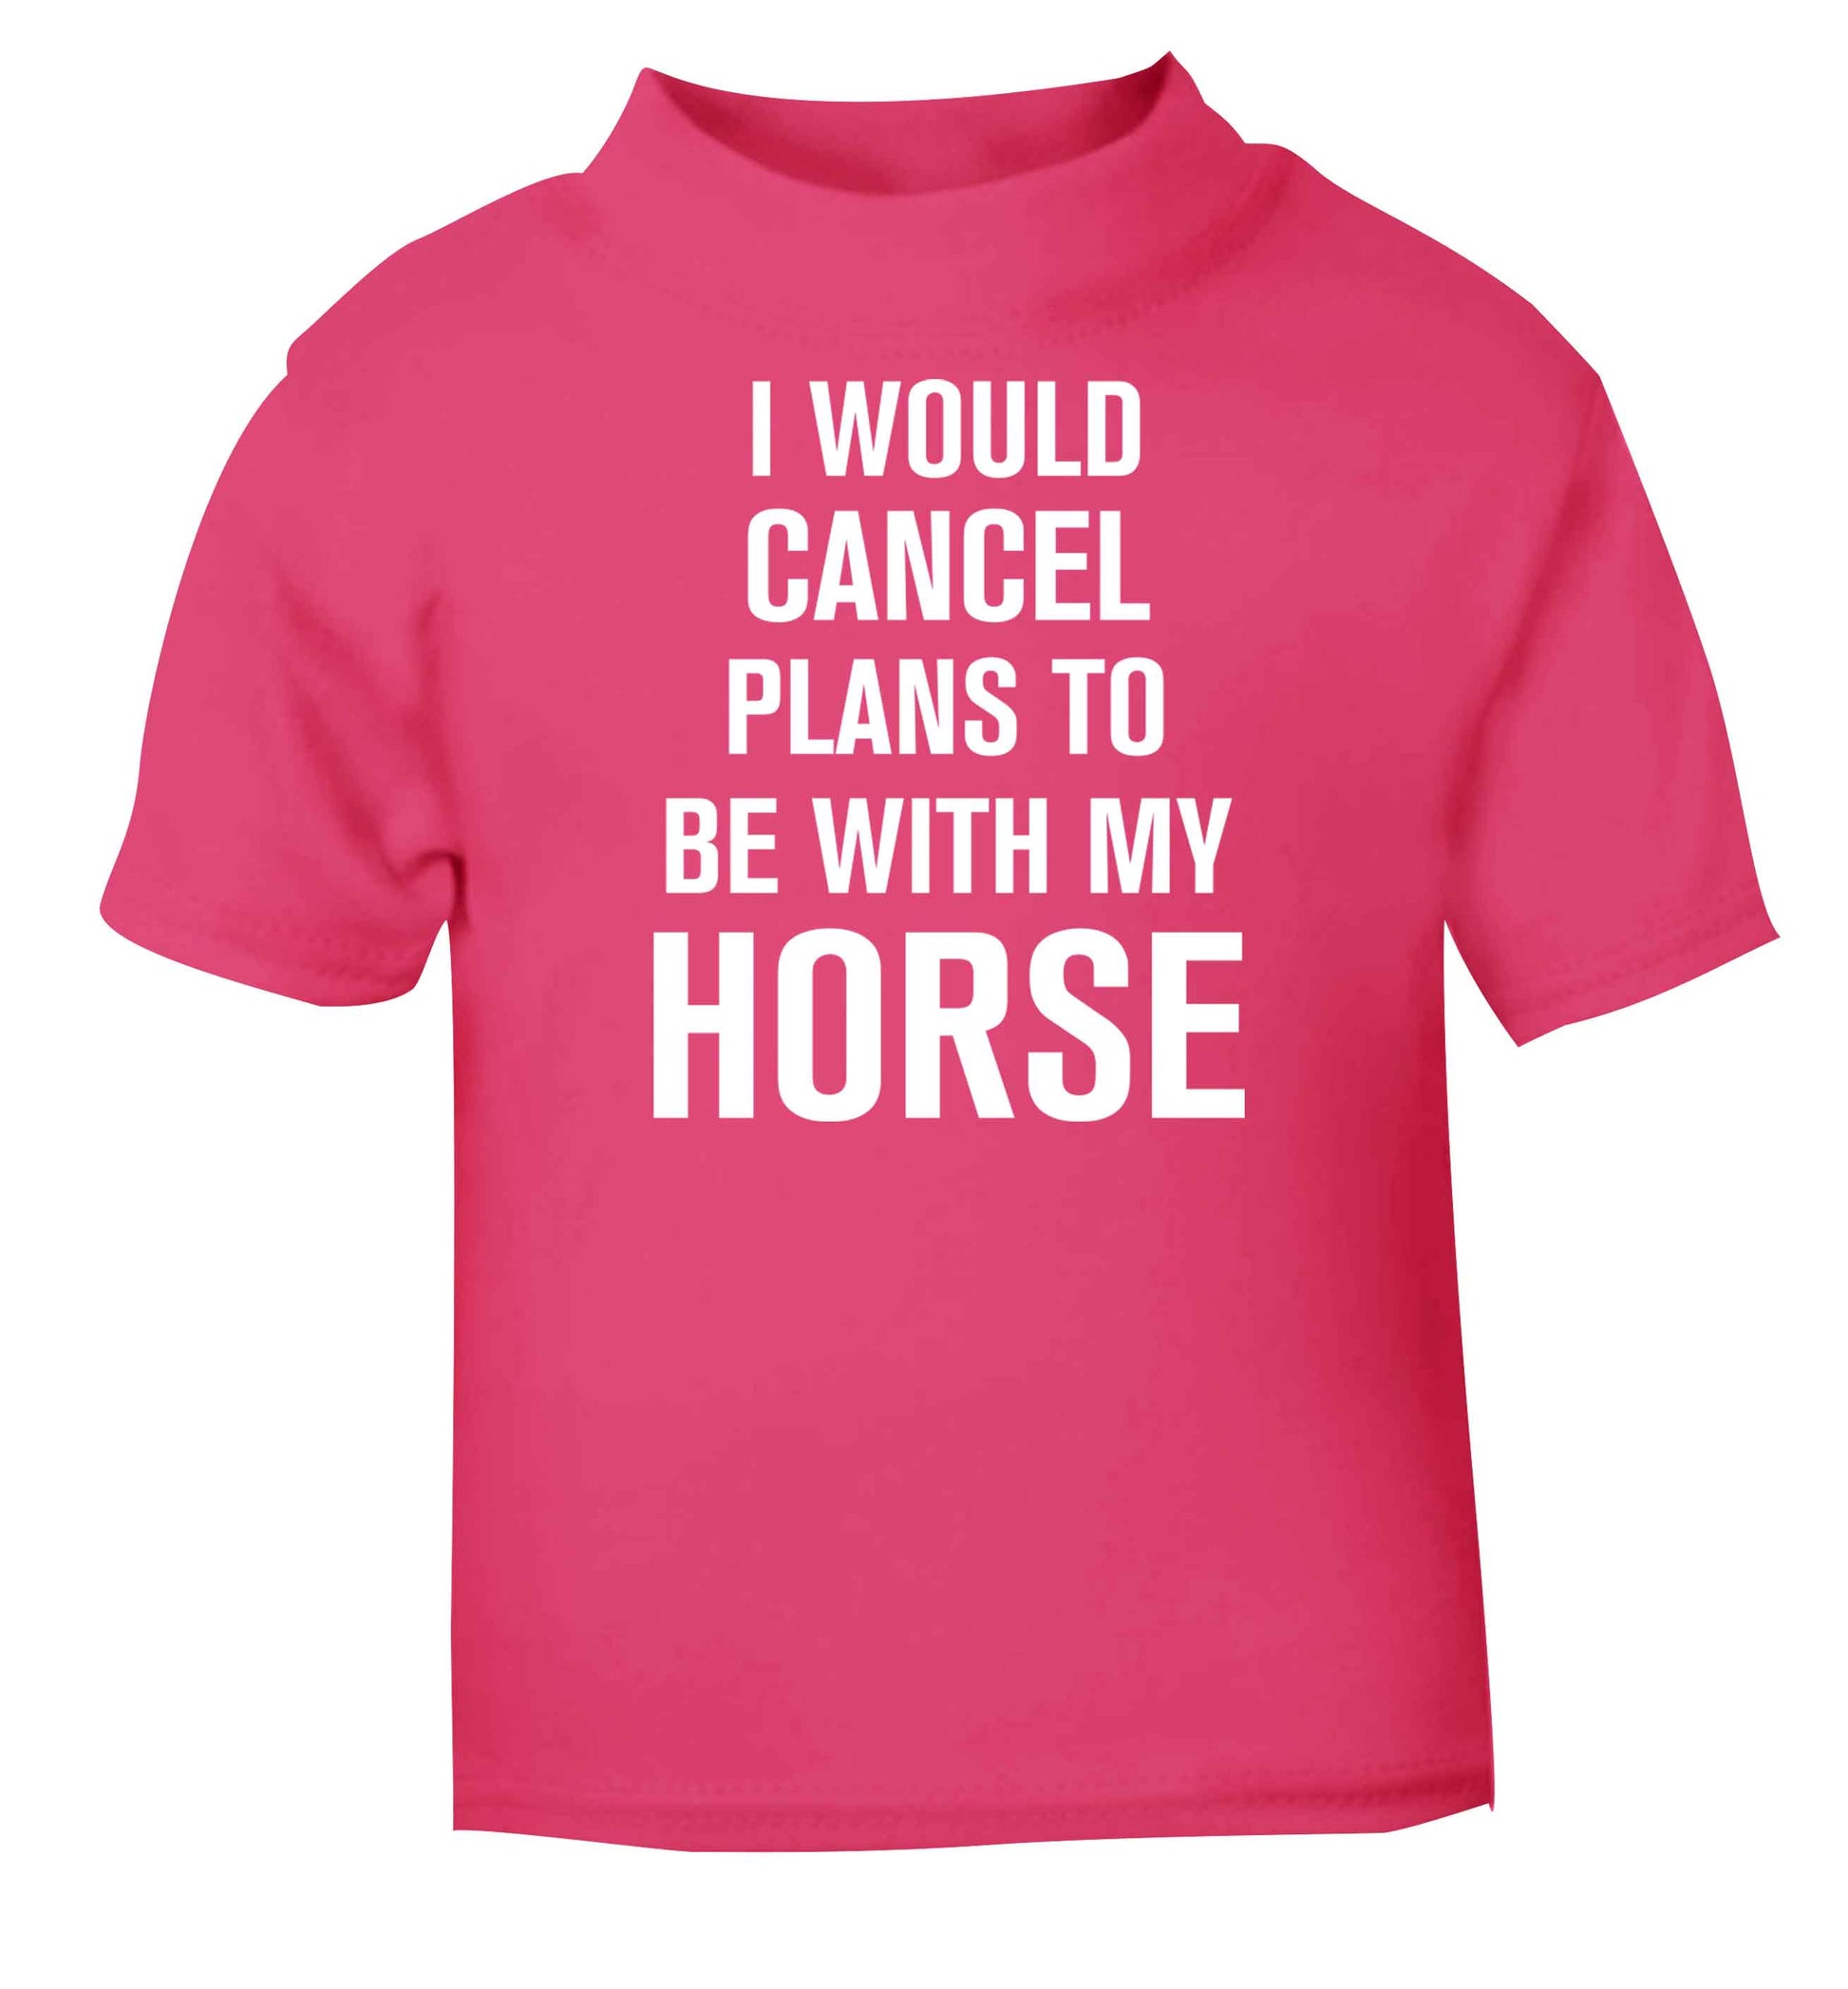 I will cancel plans to be with my horse pink baby toddler Tshirt 2 Years